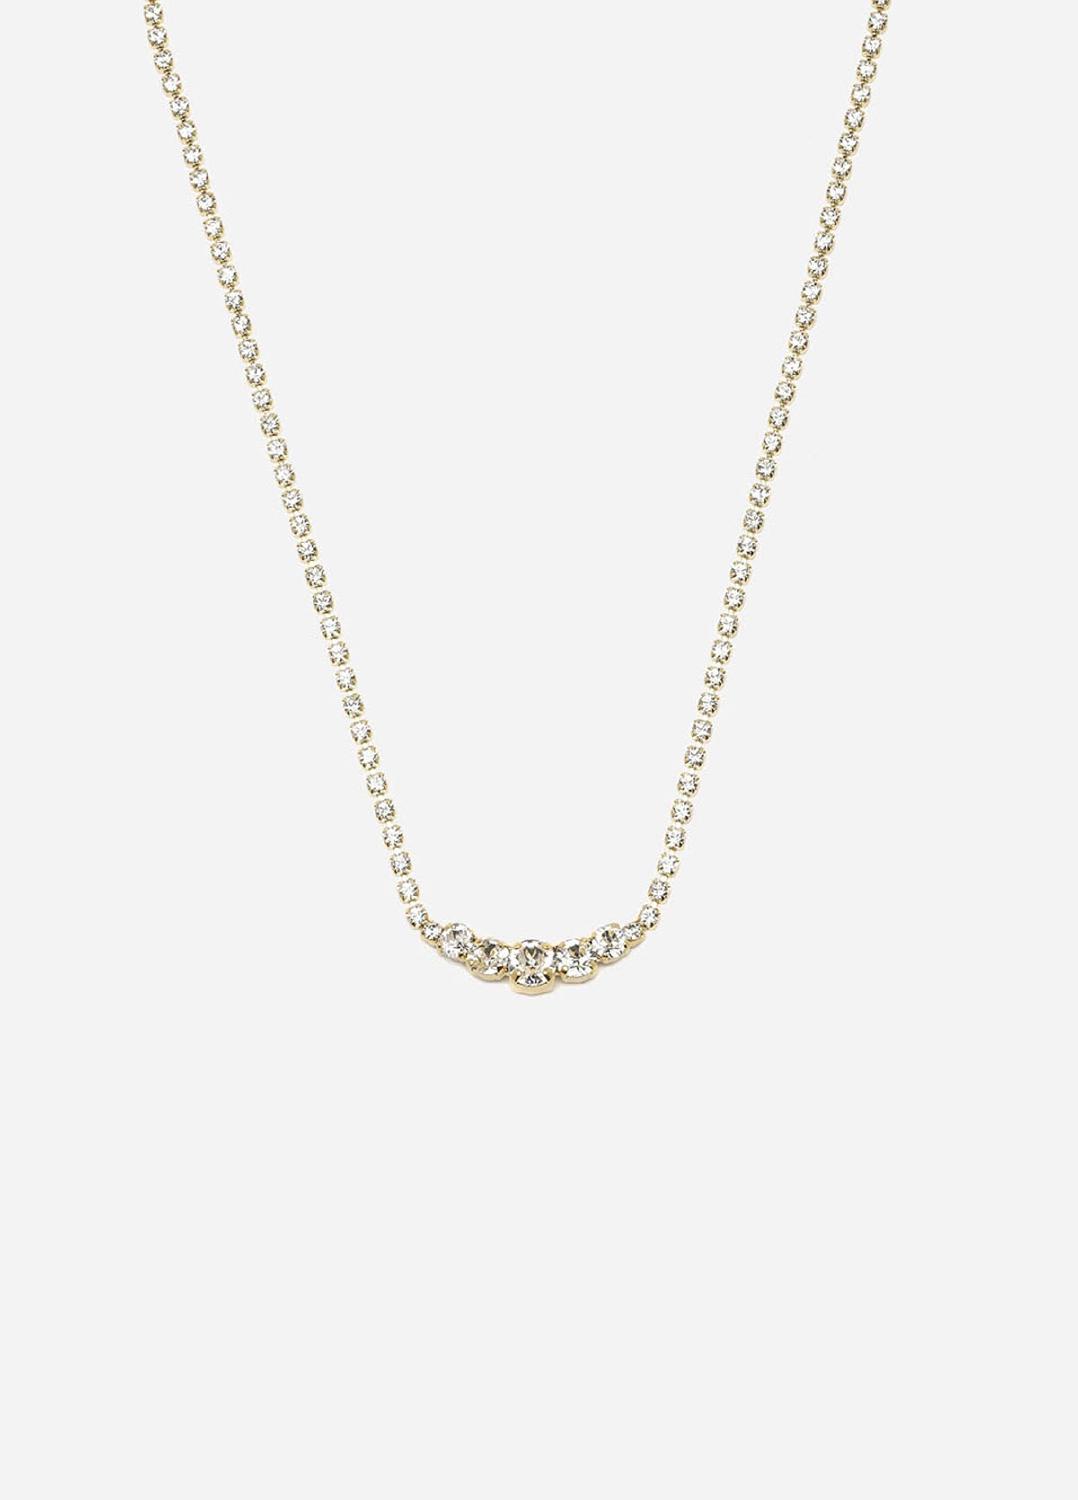 Royal Necklace, Women, Gold